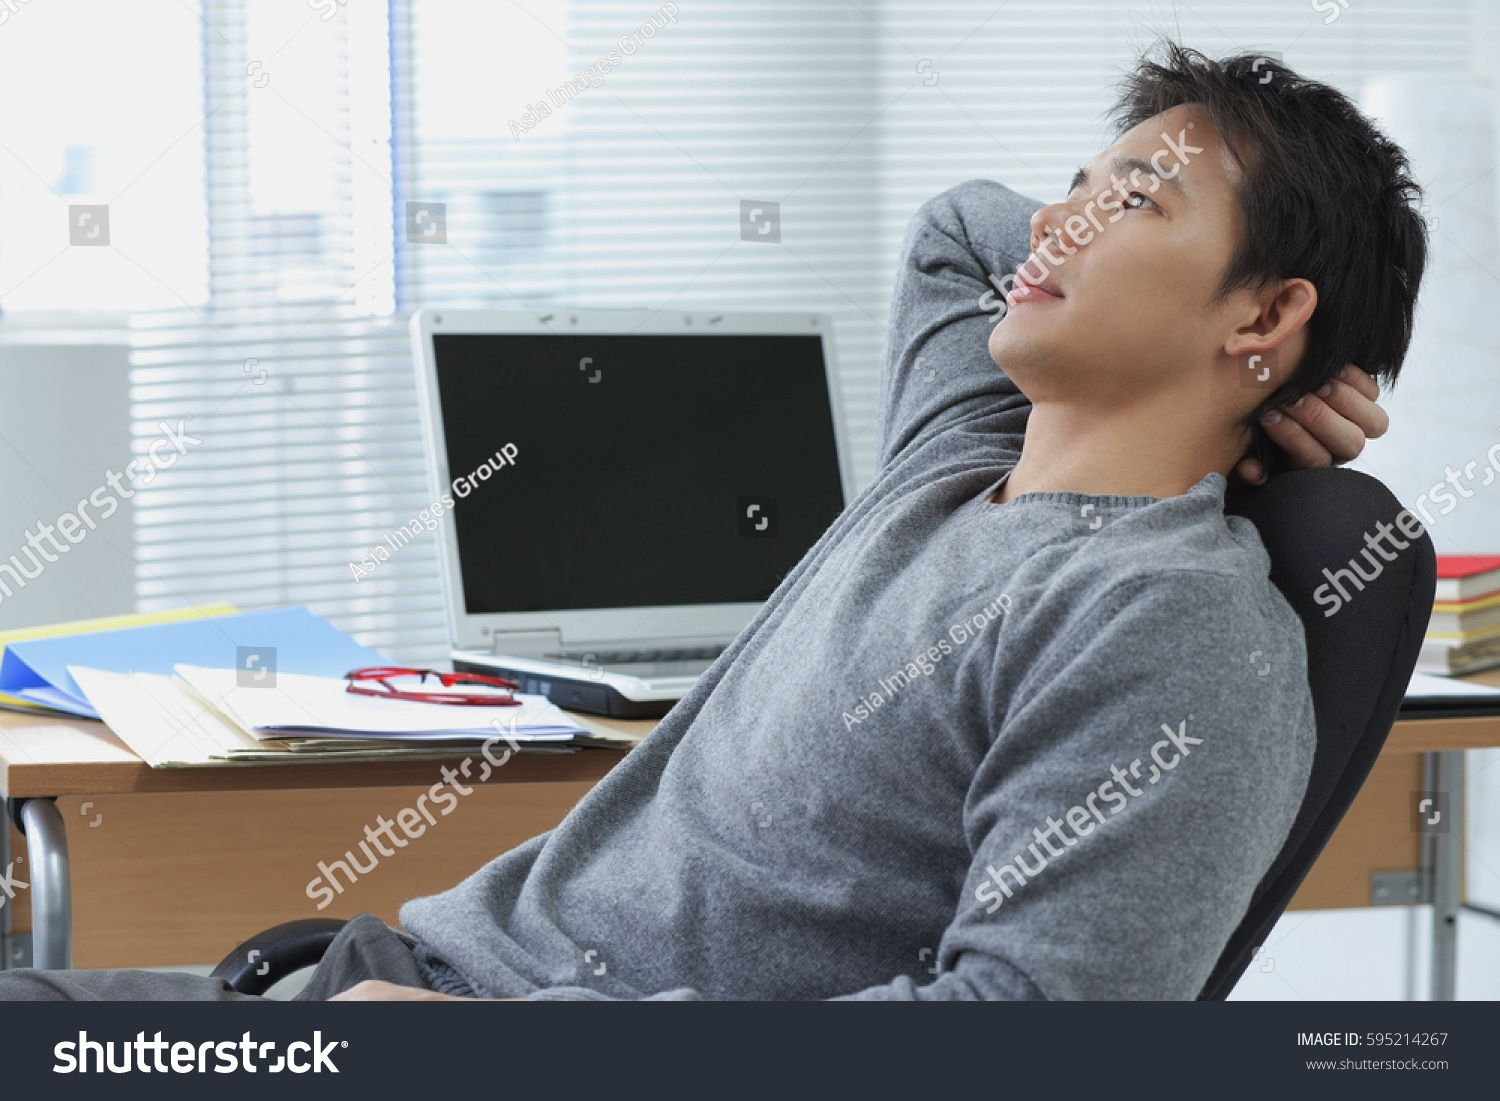 Man Leaning Back Office Chair People Stock Image 595214267